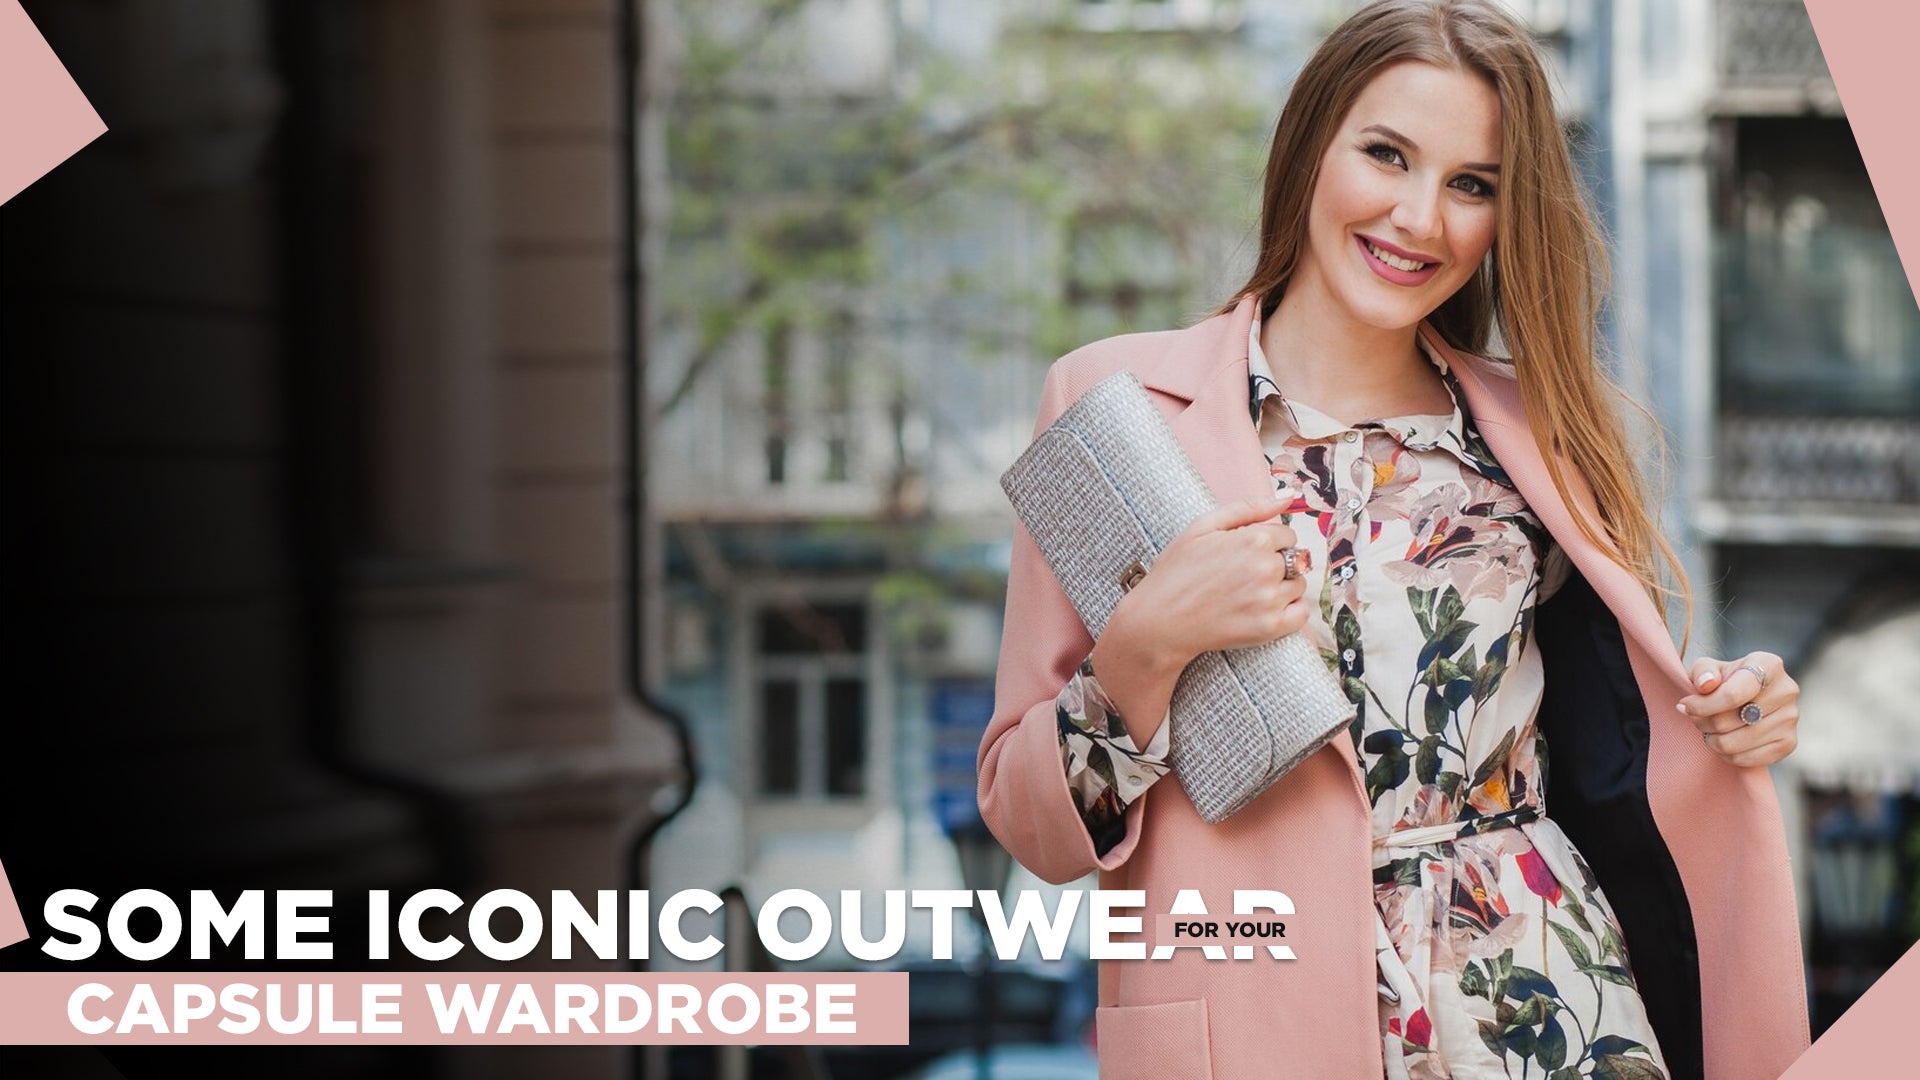 Some Iconic Outwear For Your Capsule Wardrobe